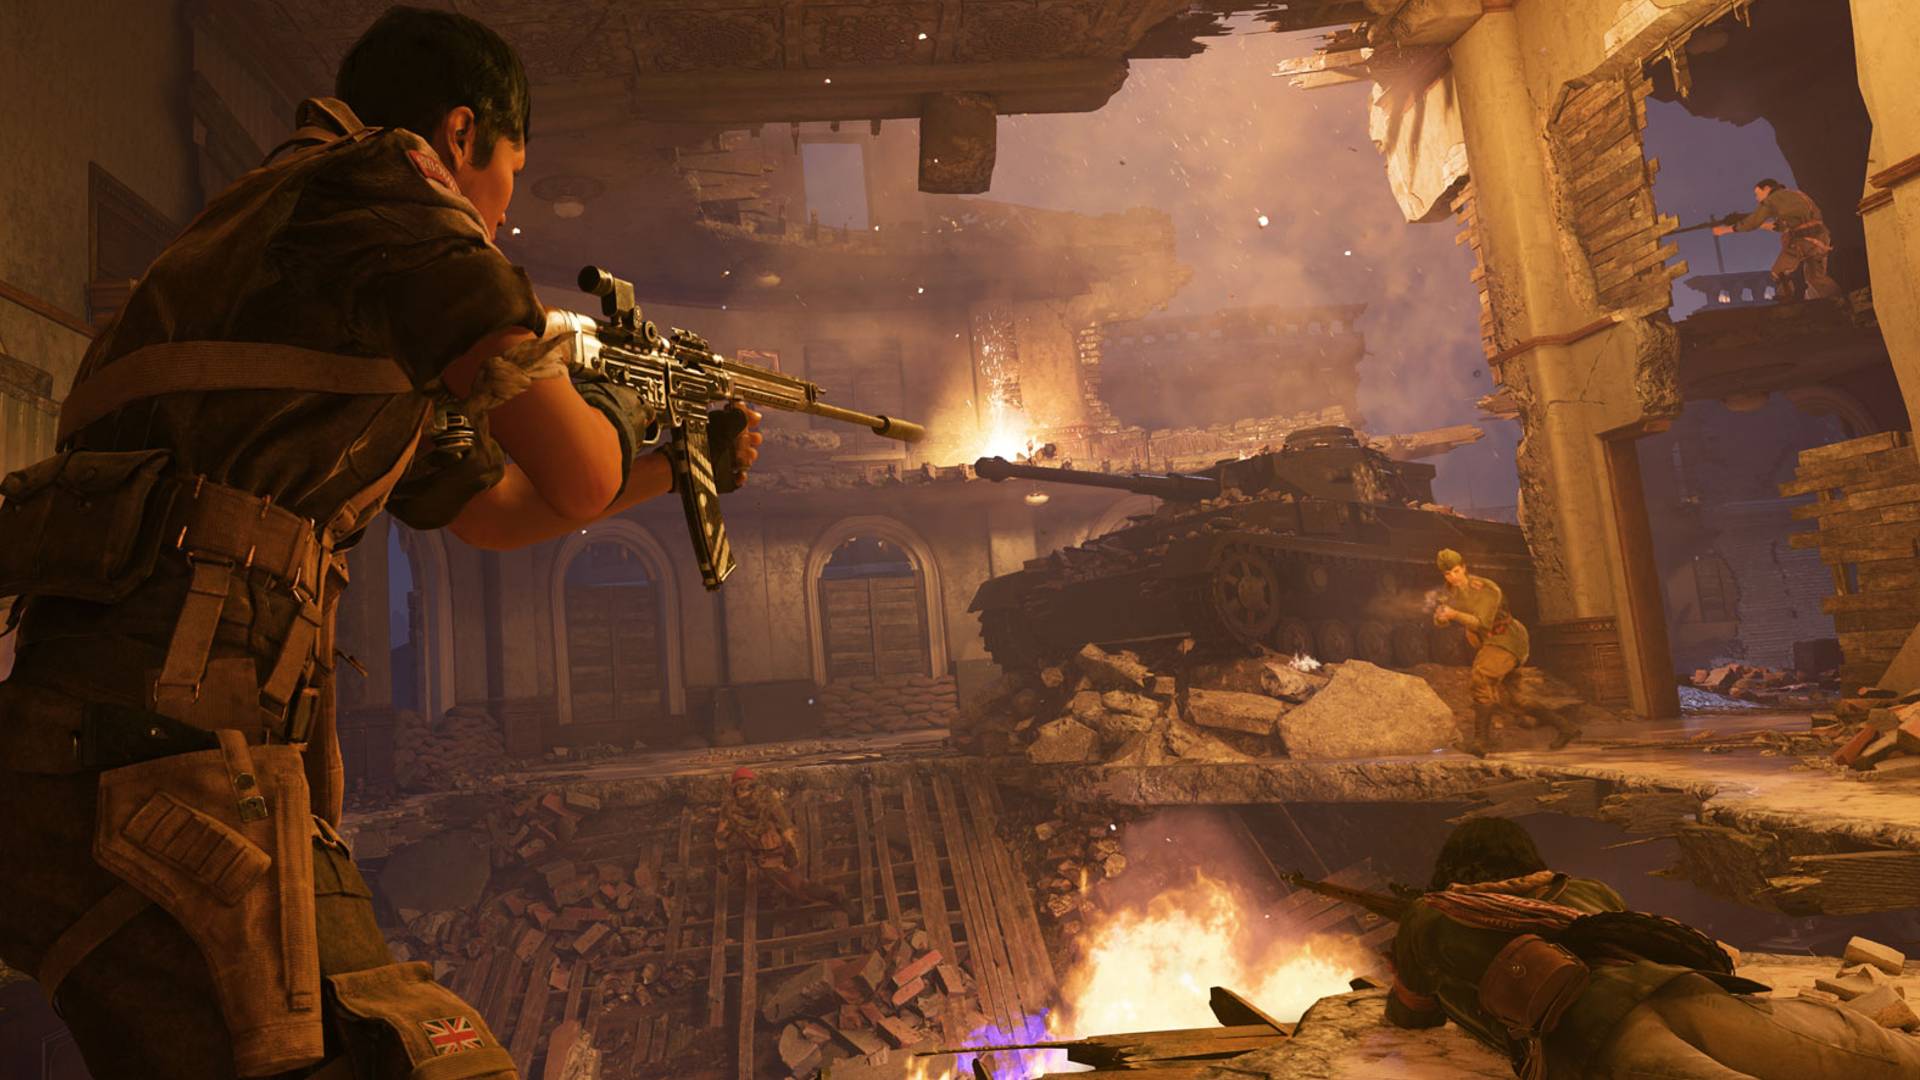 Call of Duty®: Vanguard Beta Guide – Tips for Maps, Modes, Weapons and More